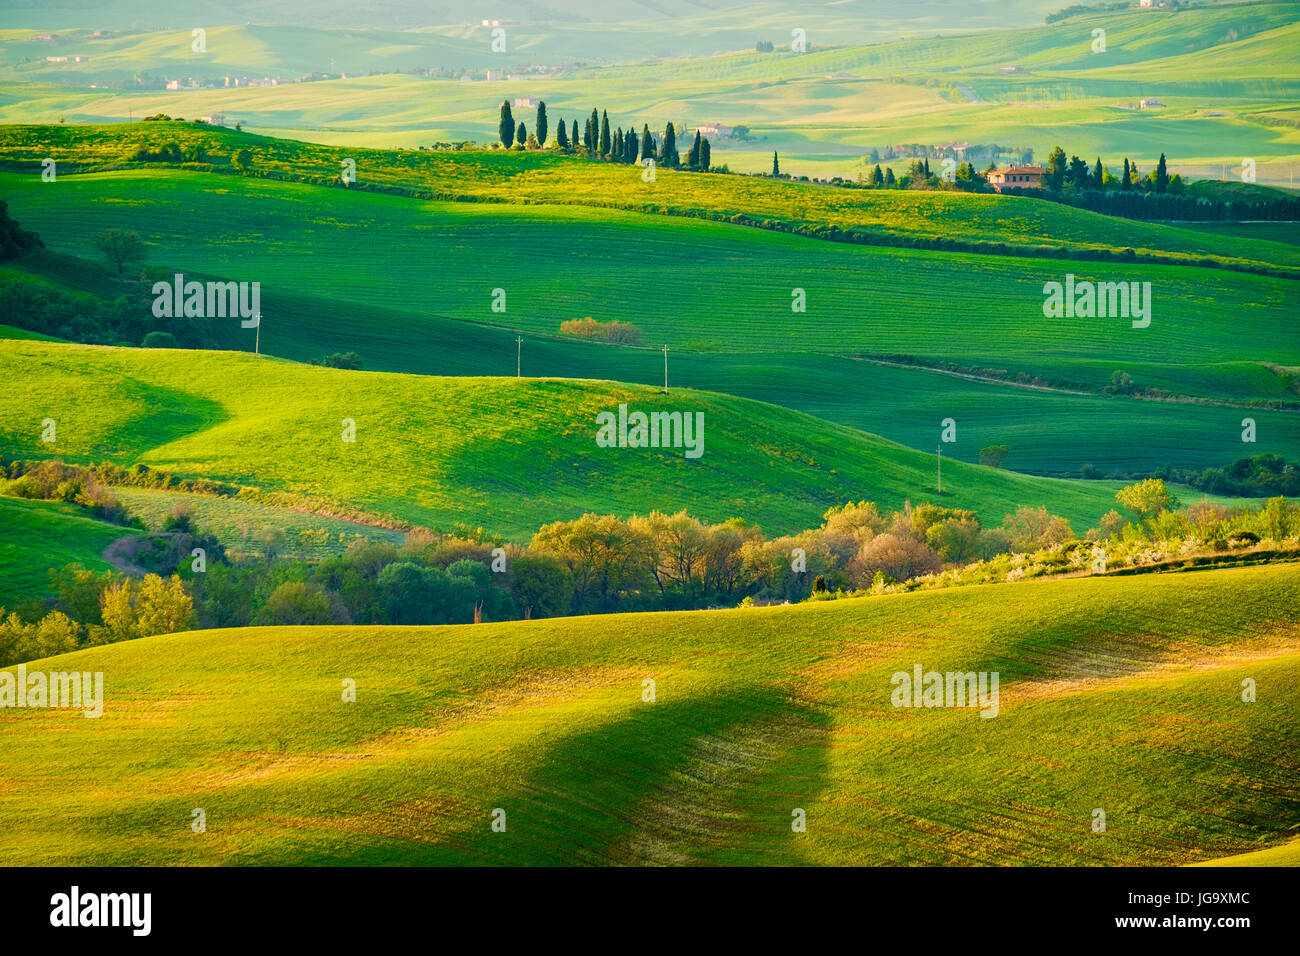 Waves hills, rolling hills, minimalistic landscape with green fields in the Tuscany. Italy Stock Photo